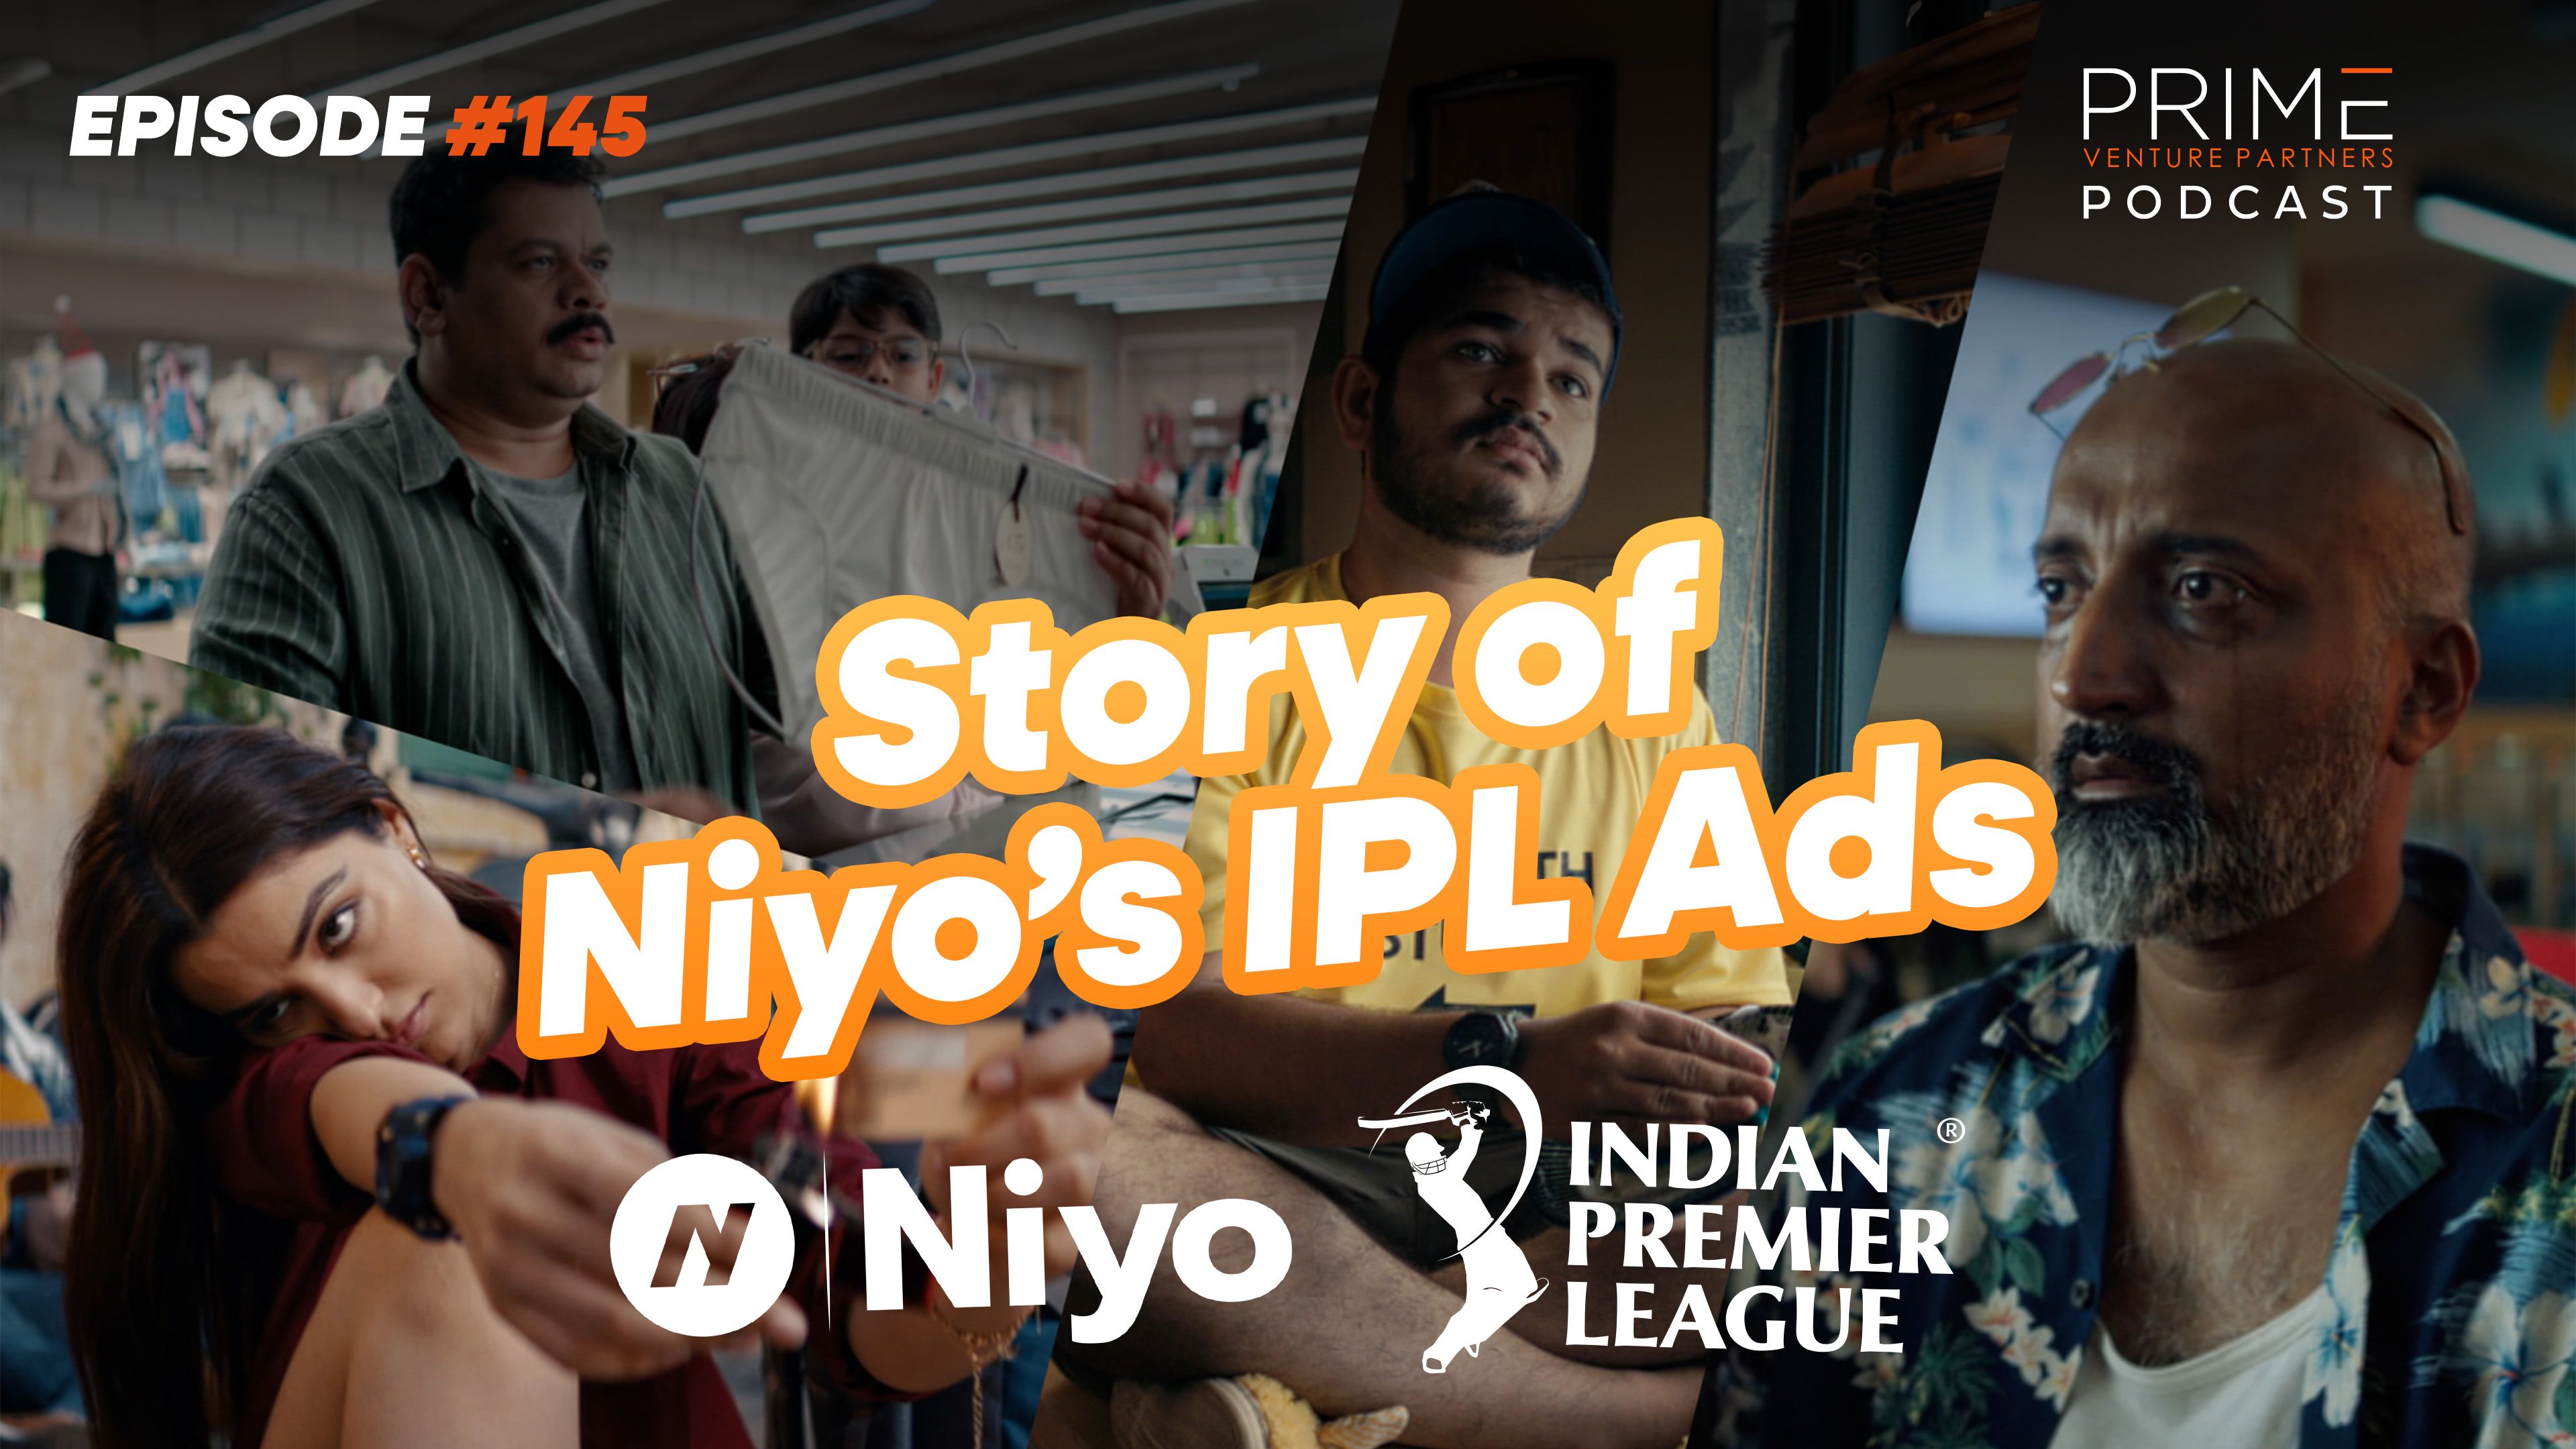 The story of Niyo’s IPL ads with Vinay Bagri and Sanjay Swamy